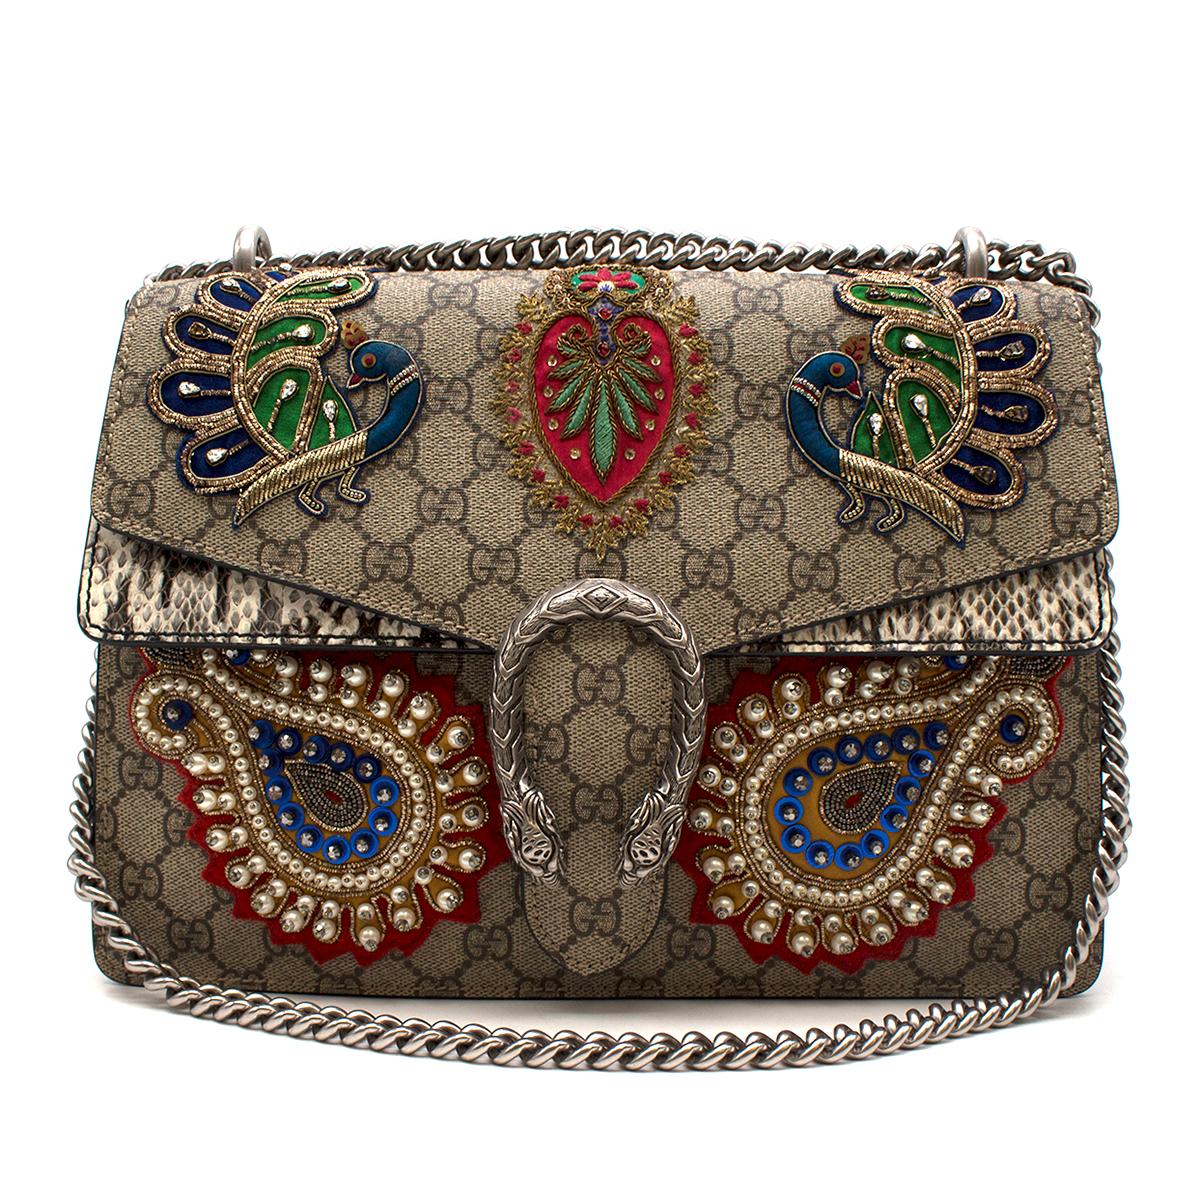 GUCCI GG Supreme Monogram Python Embroidered Dionysus Bag

-Dionysus flap bag 
-Monogram canvas and Python Body
-Peacock patch applique 
-Push clasp closure
-Two main interior pockets with one zipped interior pocket and one small interior